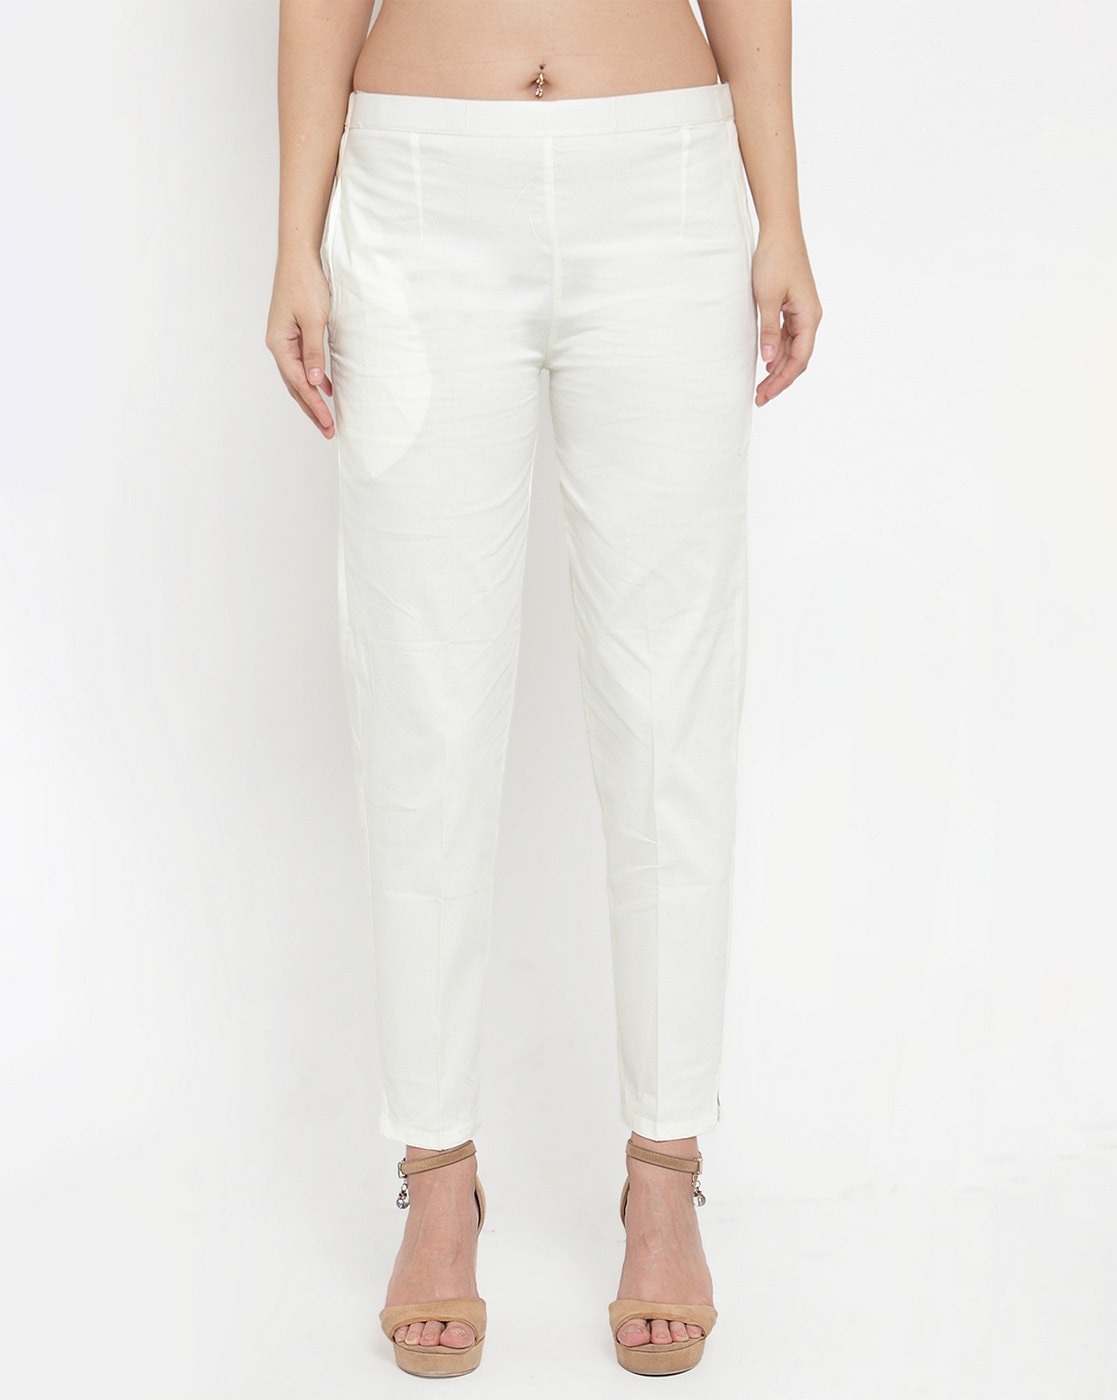 Indian White Long And High Rise Cotton Ladies Trousers With 2 Pockets For  Daily Wear at Best Price in Indore  Pari Collection